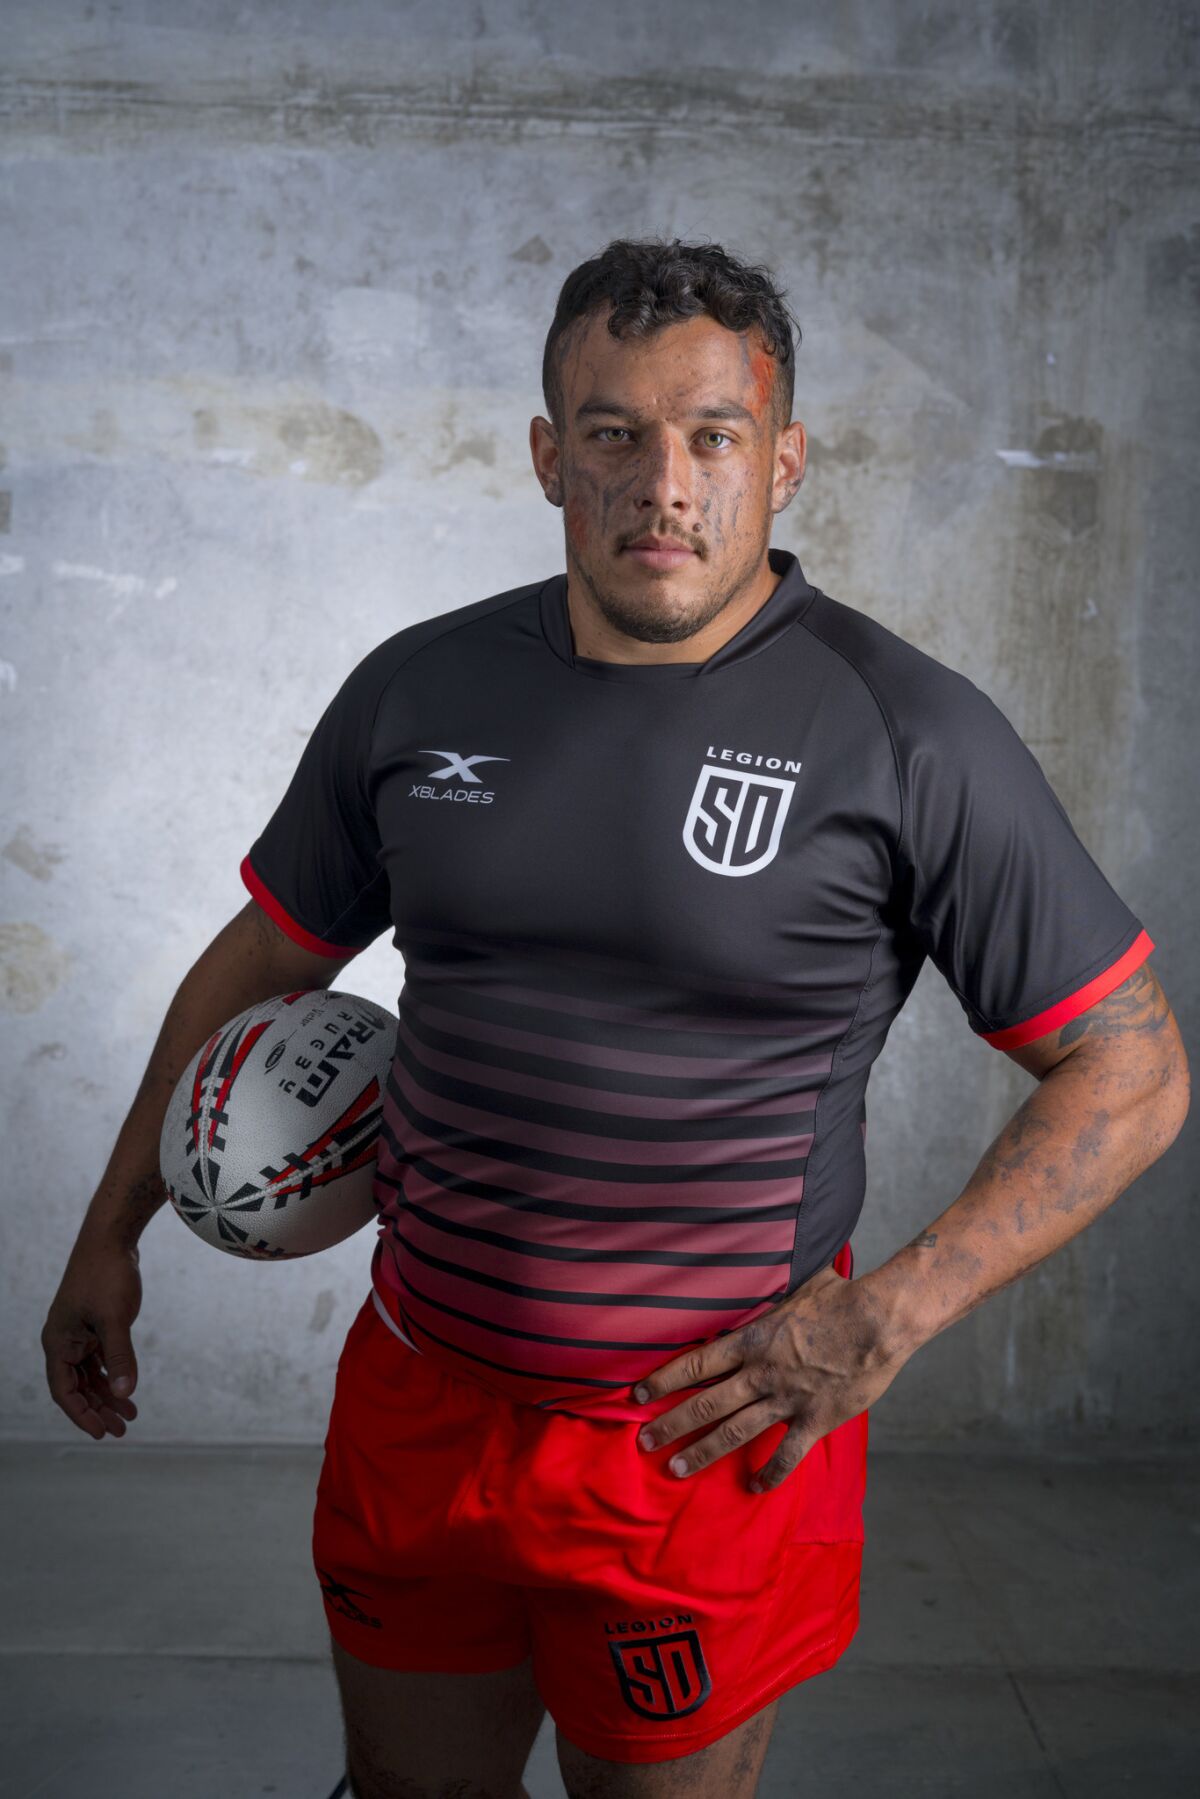 Gil Covey, a San Diego native, plays Forward: Hooker for the SD Legion rugby team.